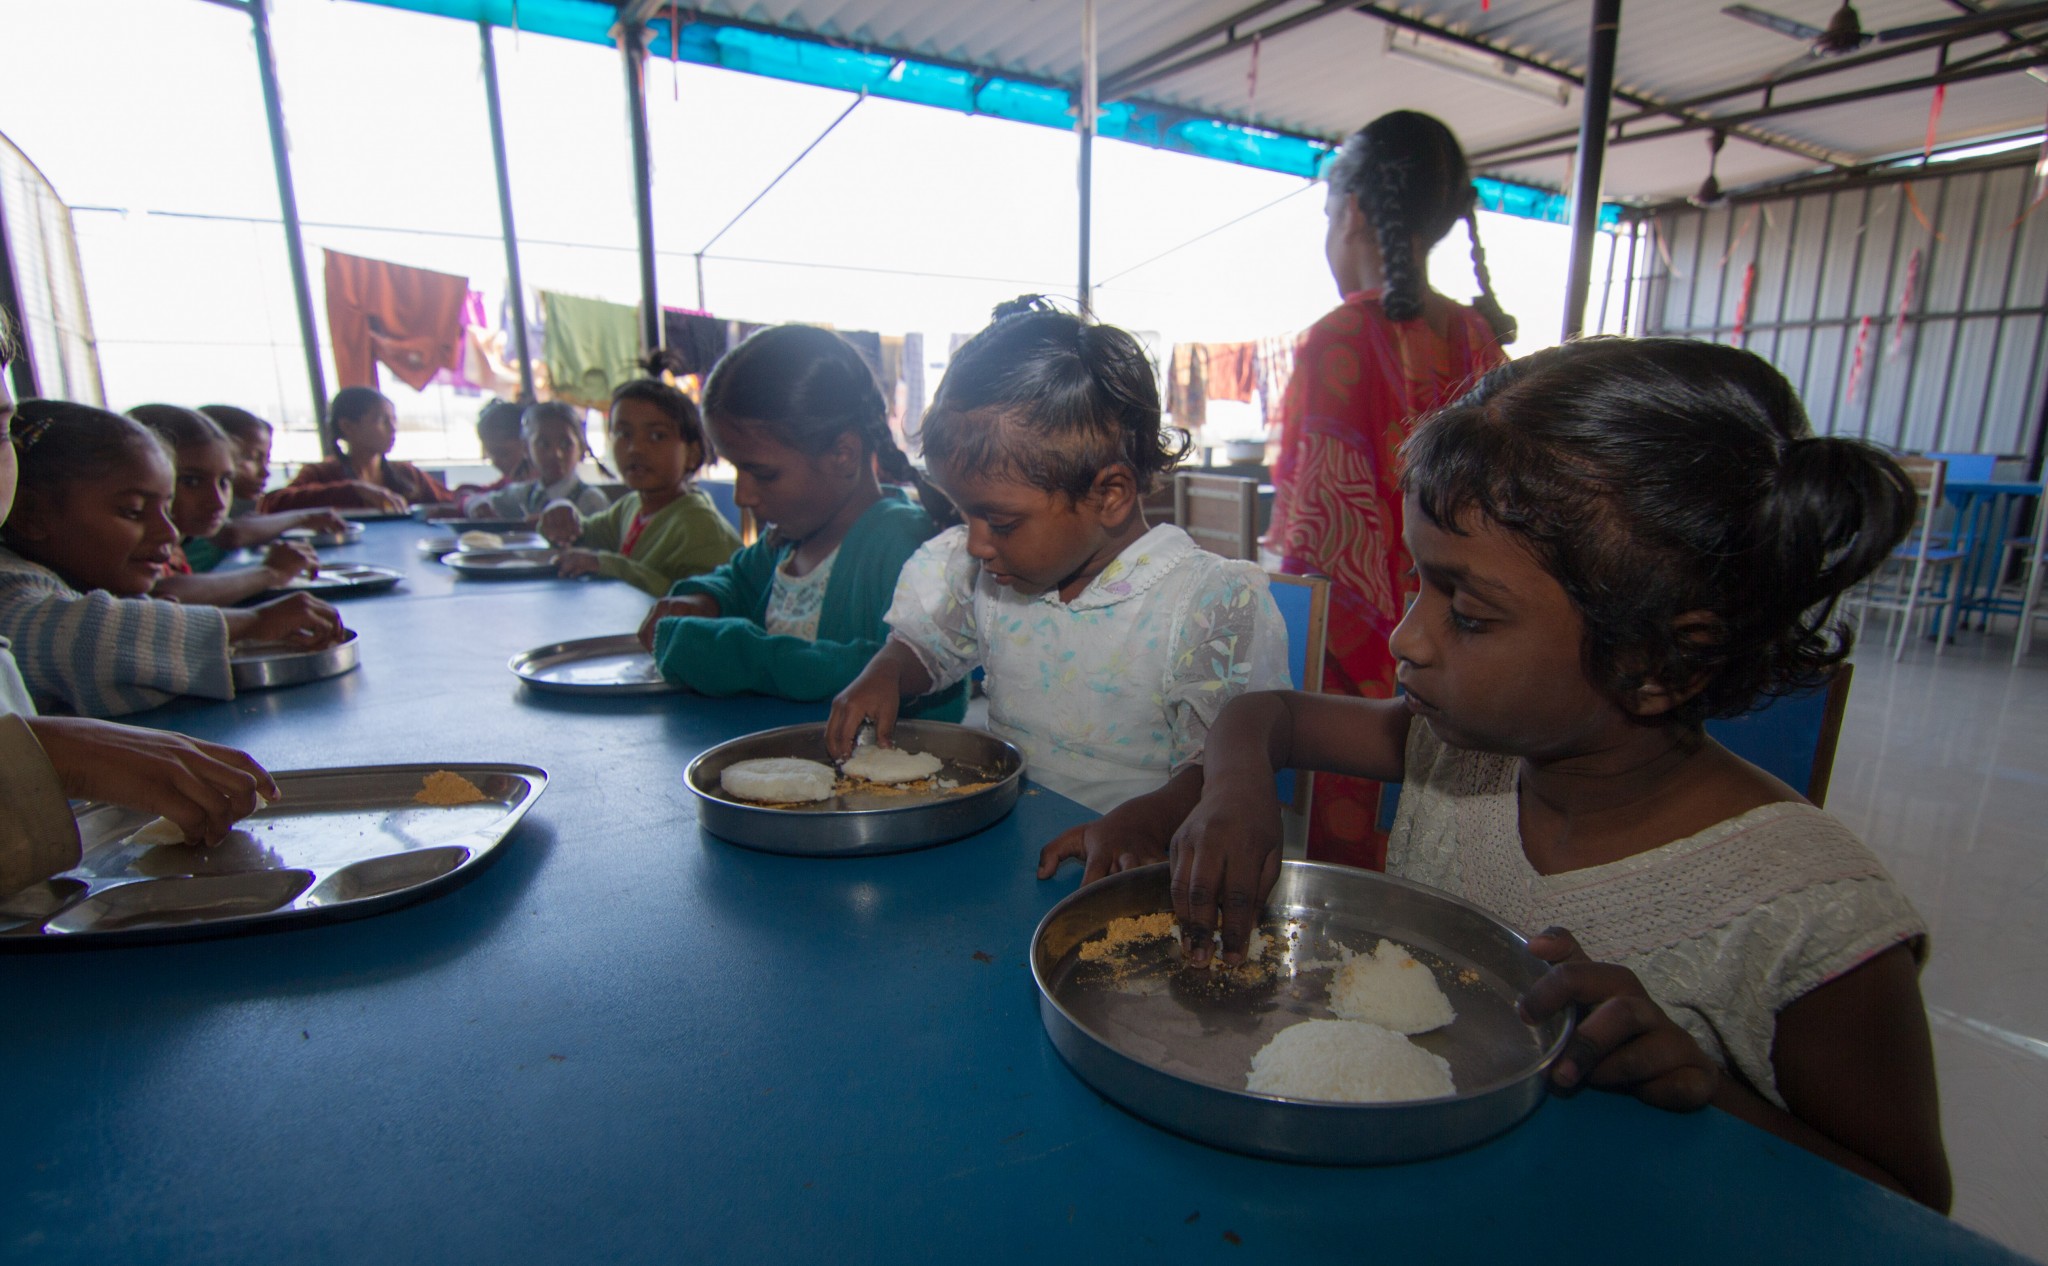 From good food to healthy living, Spandana leaves no stone unturned to improve the lives of these kids.